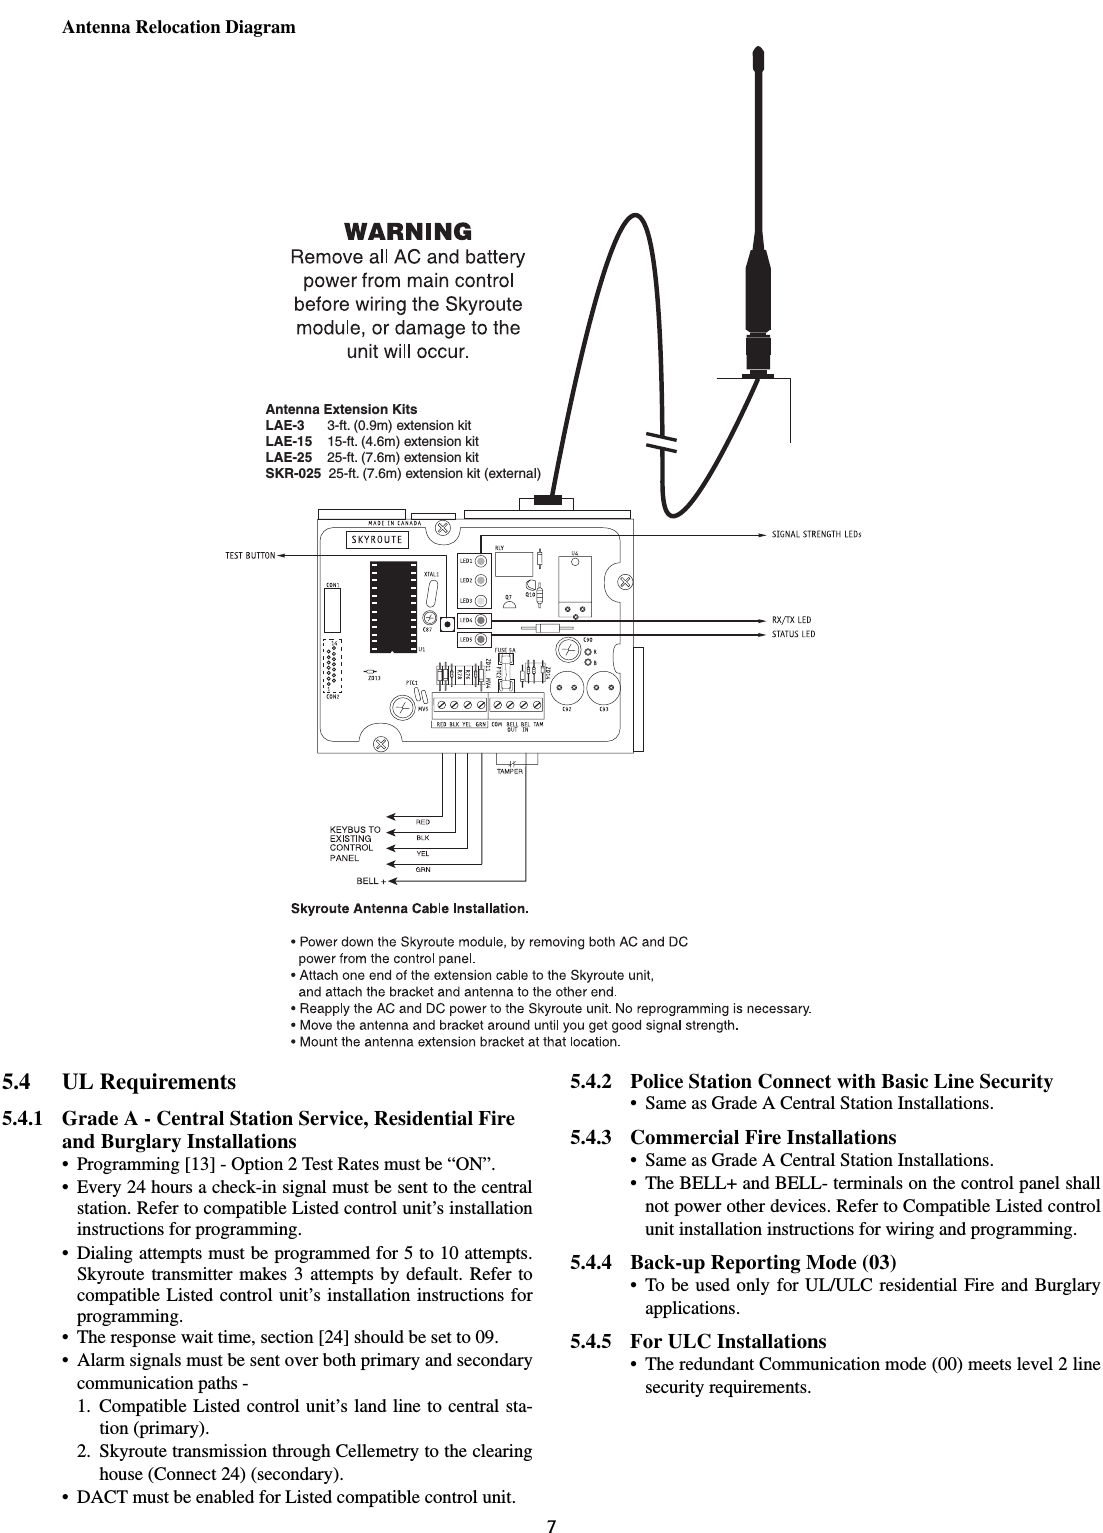 7Antenna Relocation Diagram5.4 UL Requirements5.4.1 Grade A - Central Station Service, Residential Fire and Burglary Installations• Programming [13] - Option 2 Test Rates must be “ON”.• Every 24 hours a check-in signal must be sent to the centralstation. Refer to compatible Listed control unit’s installationinstructions for programming.• Dialing attempts must be programmed for 5 to 10 attempts.Skyroute transmitter makes 3 attempts by default. Refer tocompatible Listed control unit’s installation instructions forprogramming.• The response wait time, section [24] should be set to 09.• Alarm signals must be sent over both primary and secondarycommunication paths -1. Compatible Listed control unit’s land line to central sta-tion (primary).2. Skyroute transmission through Cellemetry to the clearinghouse (Connect 24) (secondary).• DACT must be enabled for Listed compatible control unit.5.4.2 Police Station Connect with Basic Line Security• Same as Grade A Central Station Installations.5.4.3 Commercial Fire Installations• Same as Grade A Central Station Installations.• The BELL+ and BELL- terminals on the control panel shallnot power other devices. Refer to Compatible Listed controlunit installation instructions for wiring and programming.5.4.4 Back-up Reporting Mode (03) • To be used only for UL/ULC residential Fire and Burglaryapplications.5.4.5 For ULC Installations• The redundant Communication mode (00) meets level 2 linesecurity requirements.Antenna Extension KitsLAE-3 3-ft. (0.9m) extension kitLAE-15LAE-25SKR-02515-ft. (4.6m) extension kit25-ft. (7.6m) extension kit25-ft. (7.6m) extension kit (external)